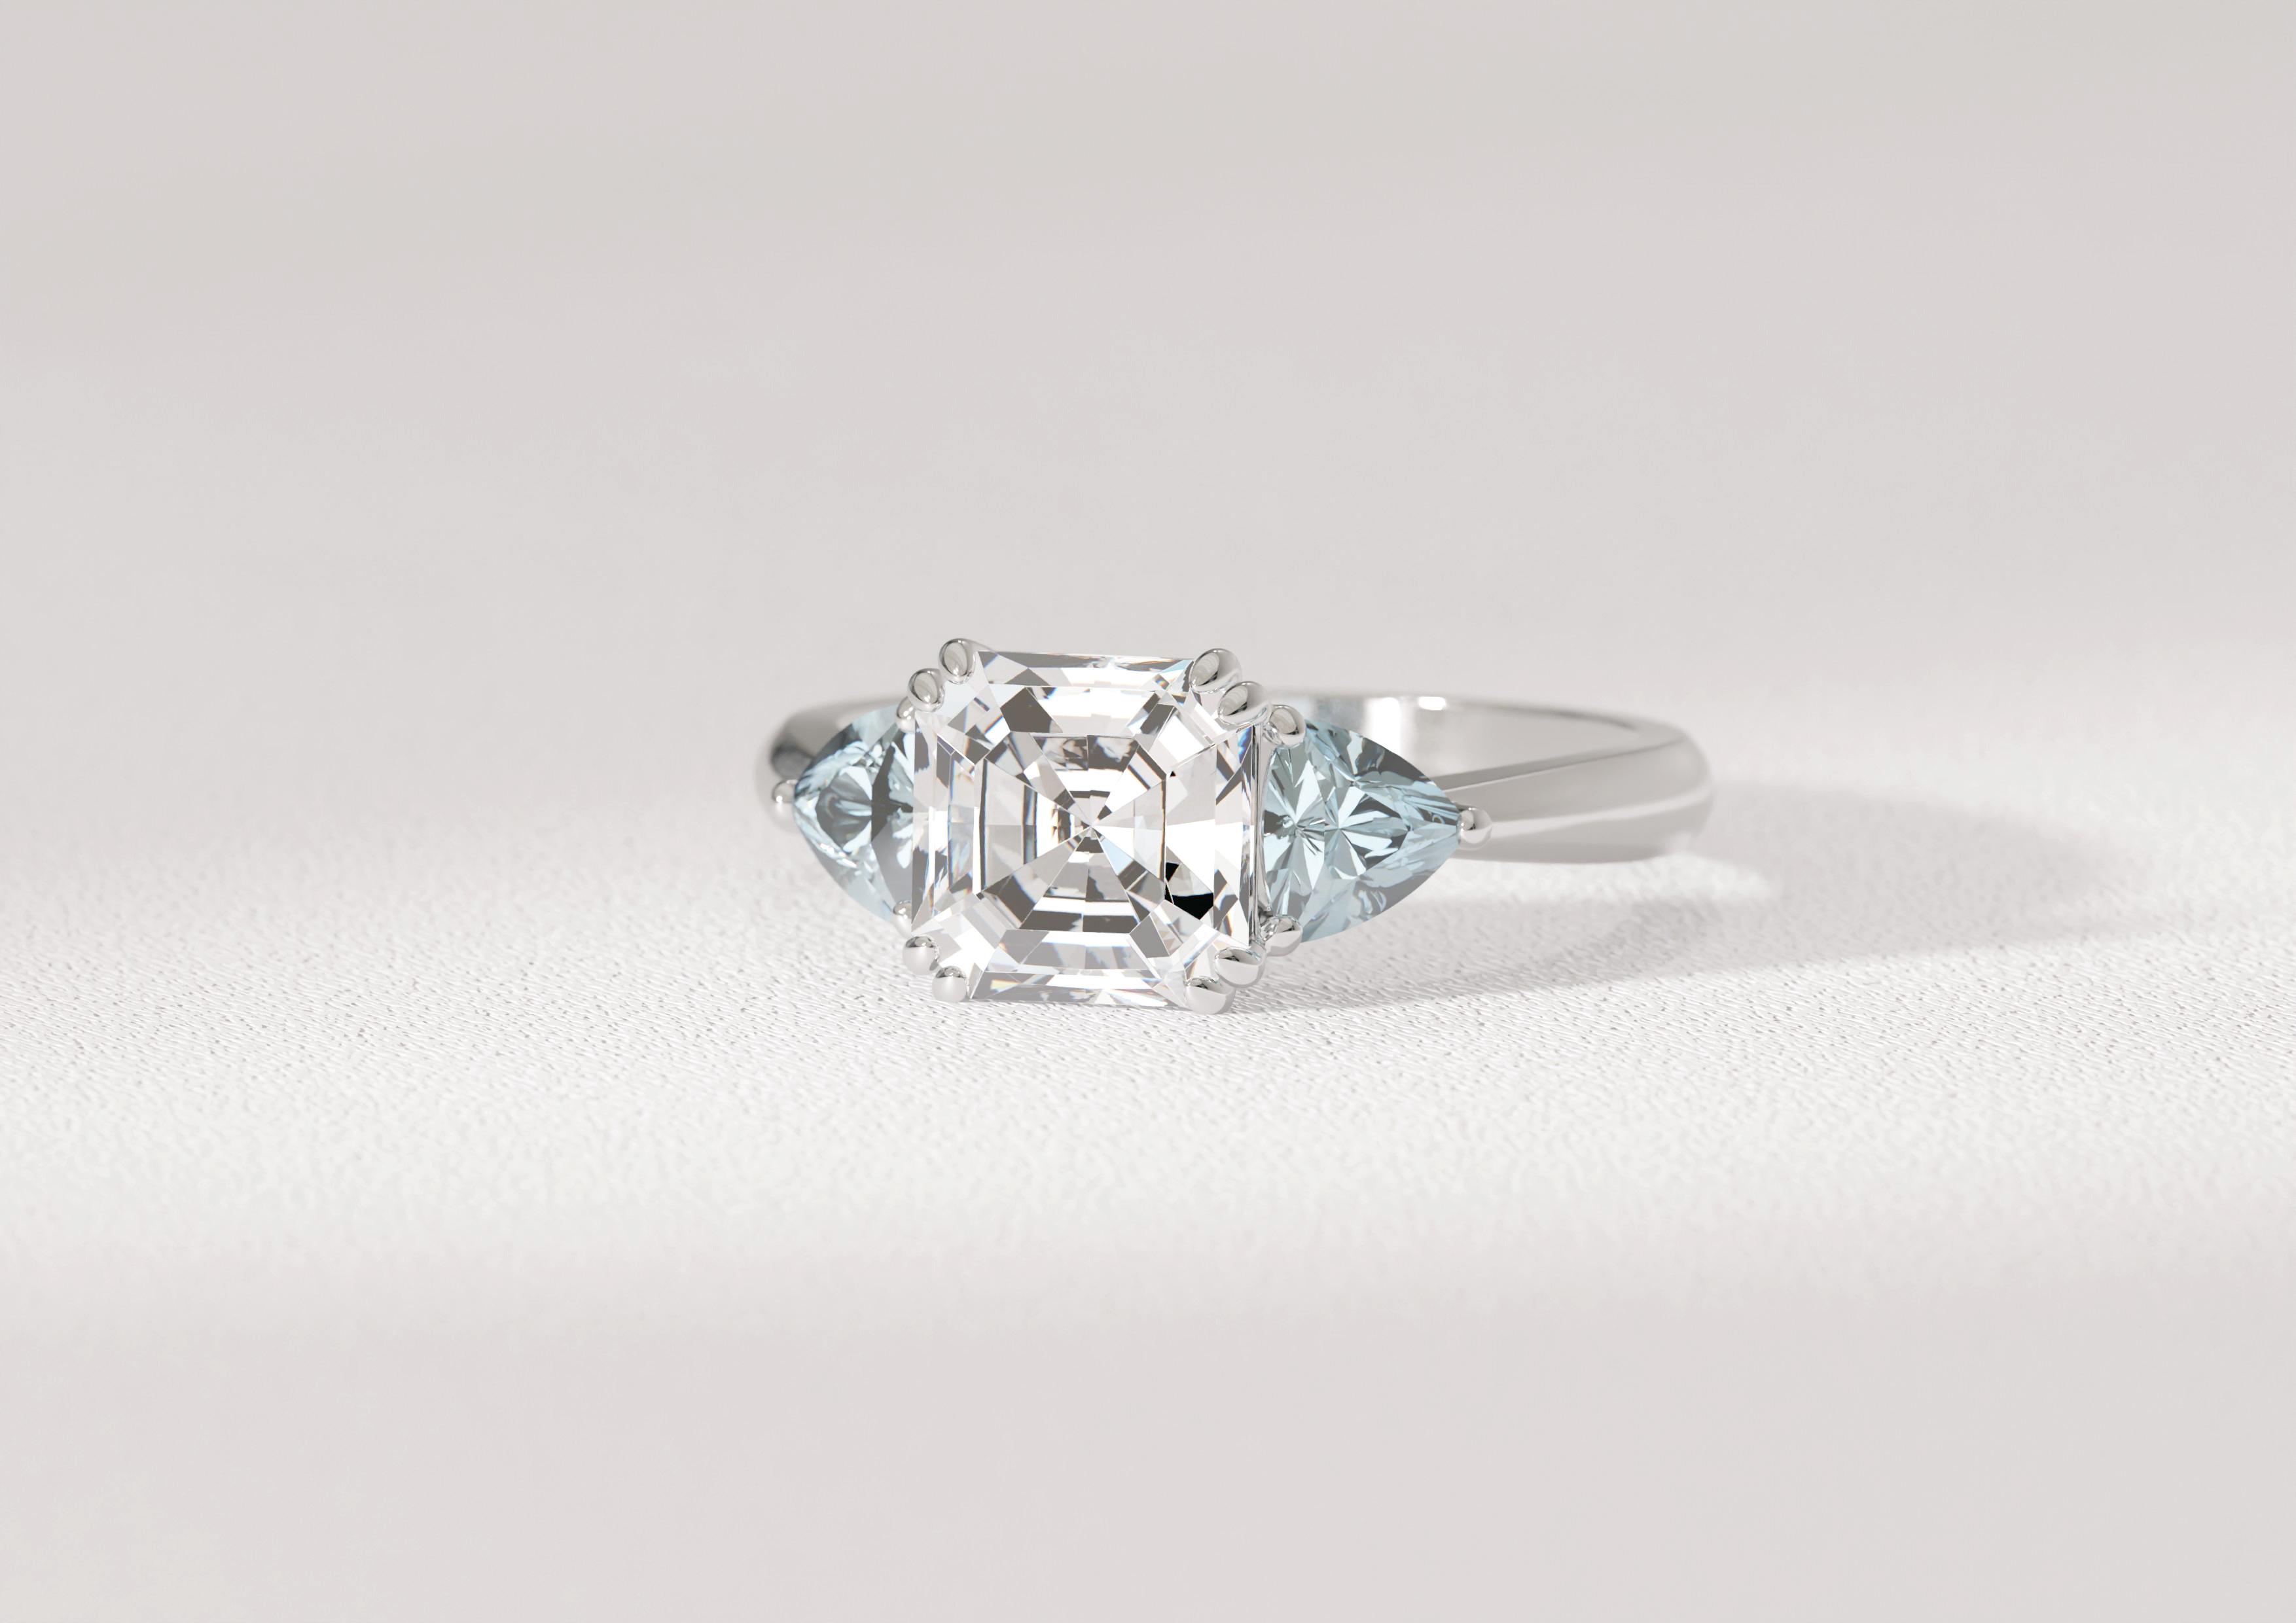 Asscher Cut Diamonds – are they special? Cover Photo